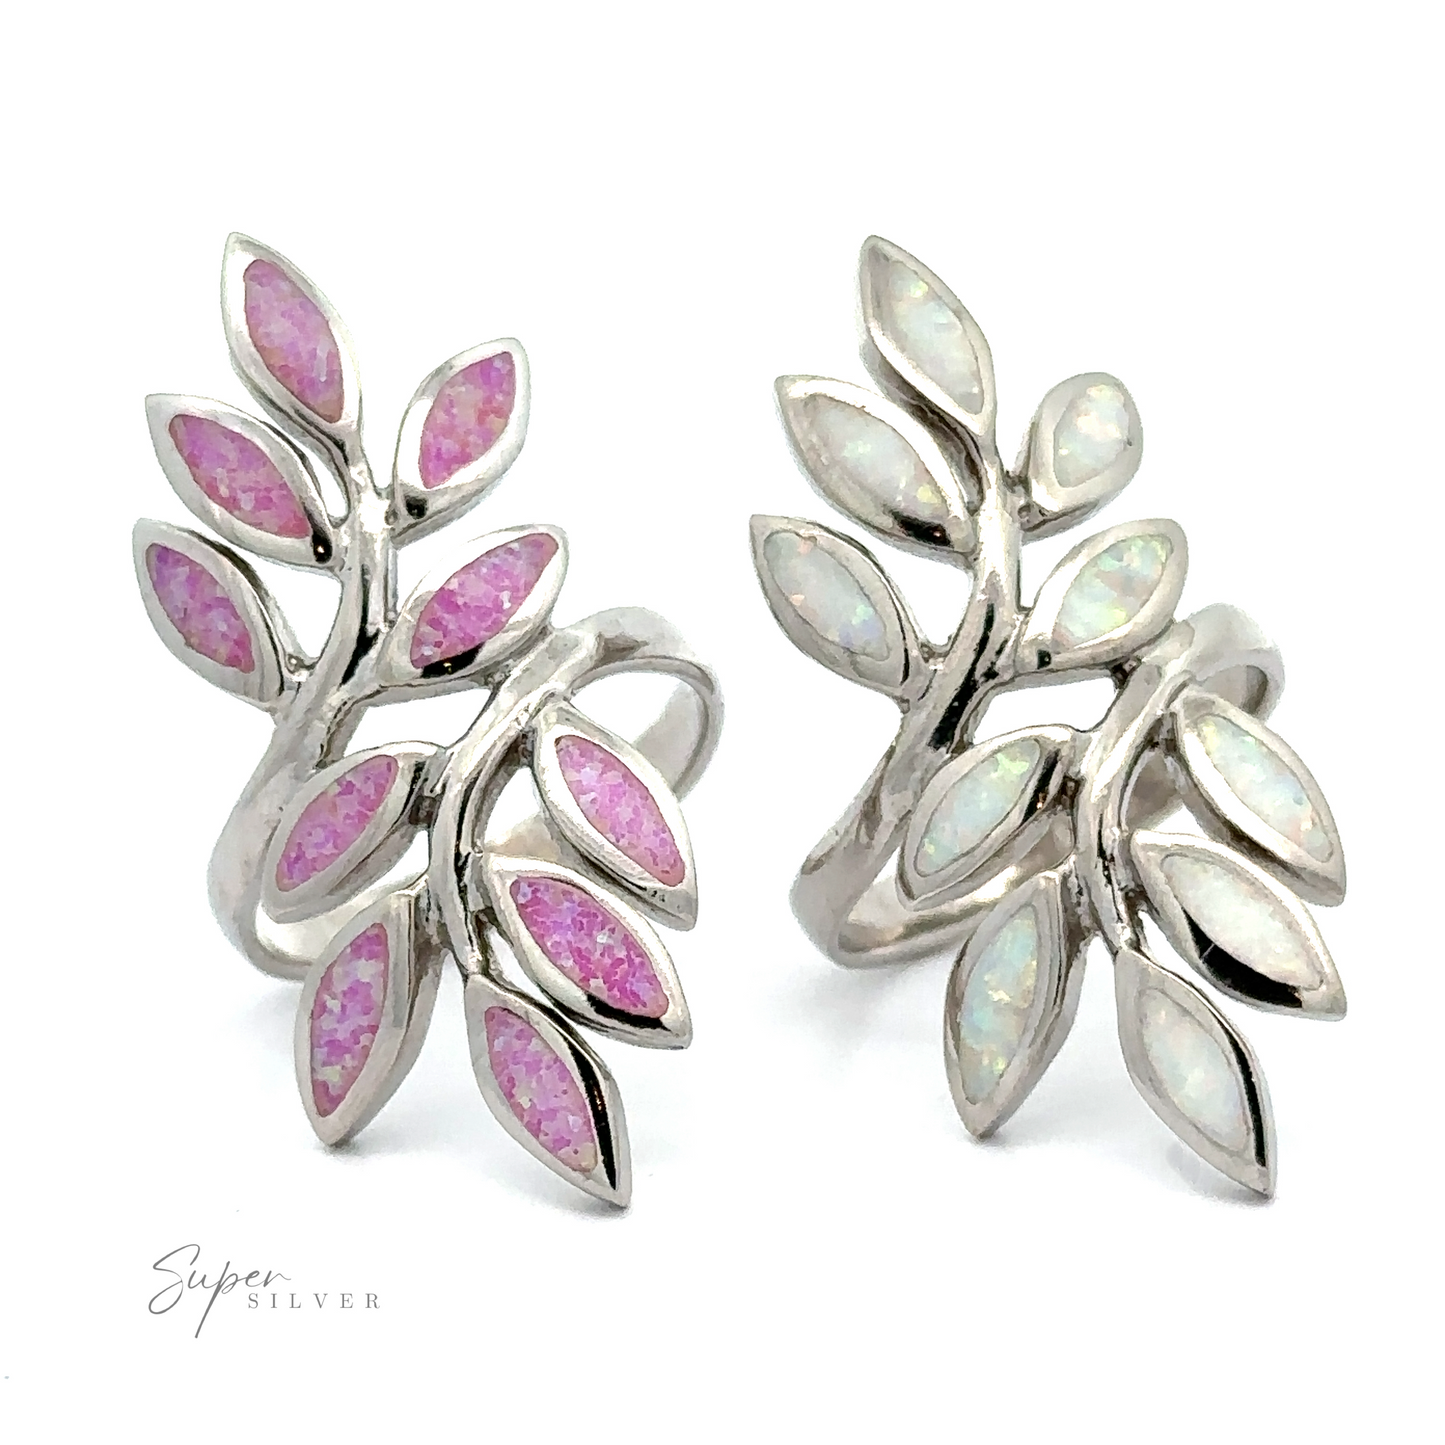 A pair of silver earrings with leaf-shaped inlays of the Long Lab-Created Opal Leaves Ring and pink gemstones, embodying nature's allure.